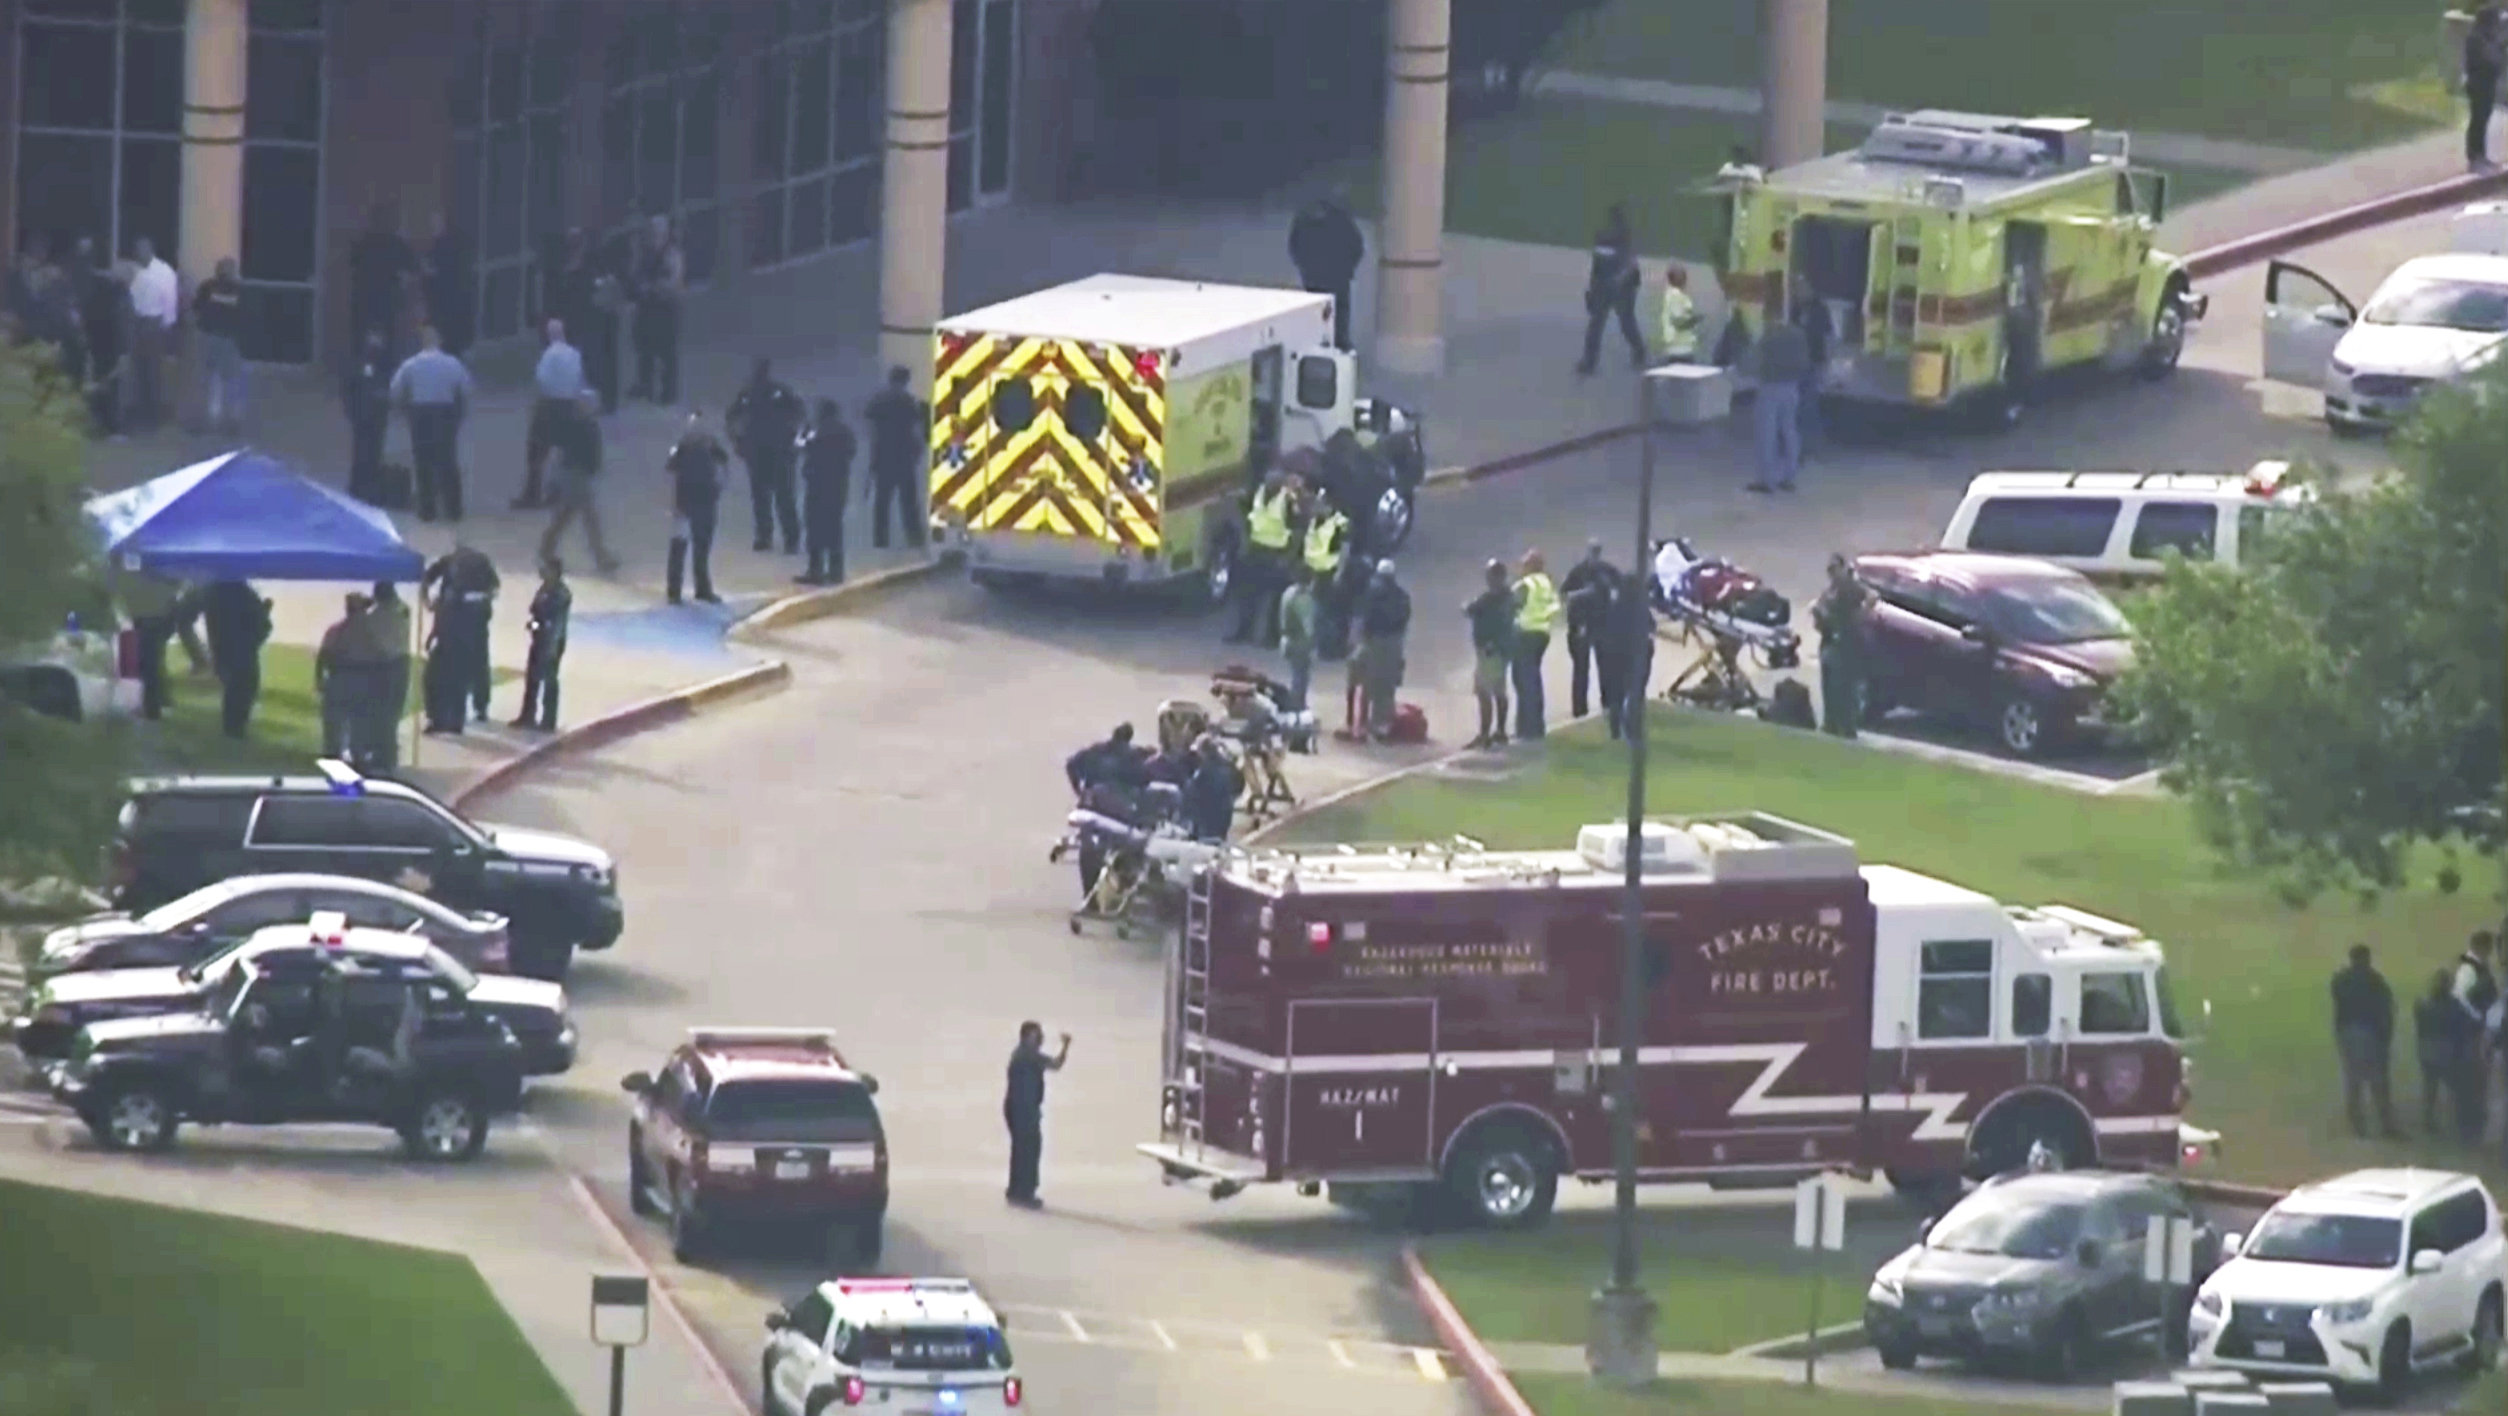 Police officers respond to a high school in Santa Fe, after an active shooter was reported on campus on May 18, 2018 (KTRK-TV ABC13/AP)